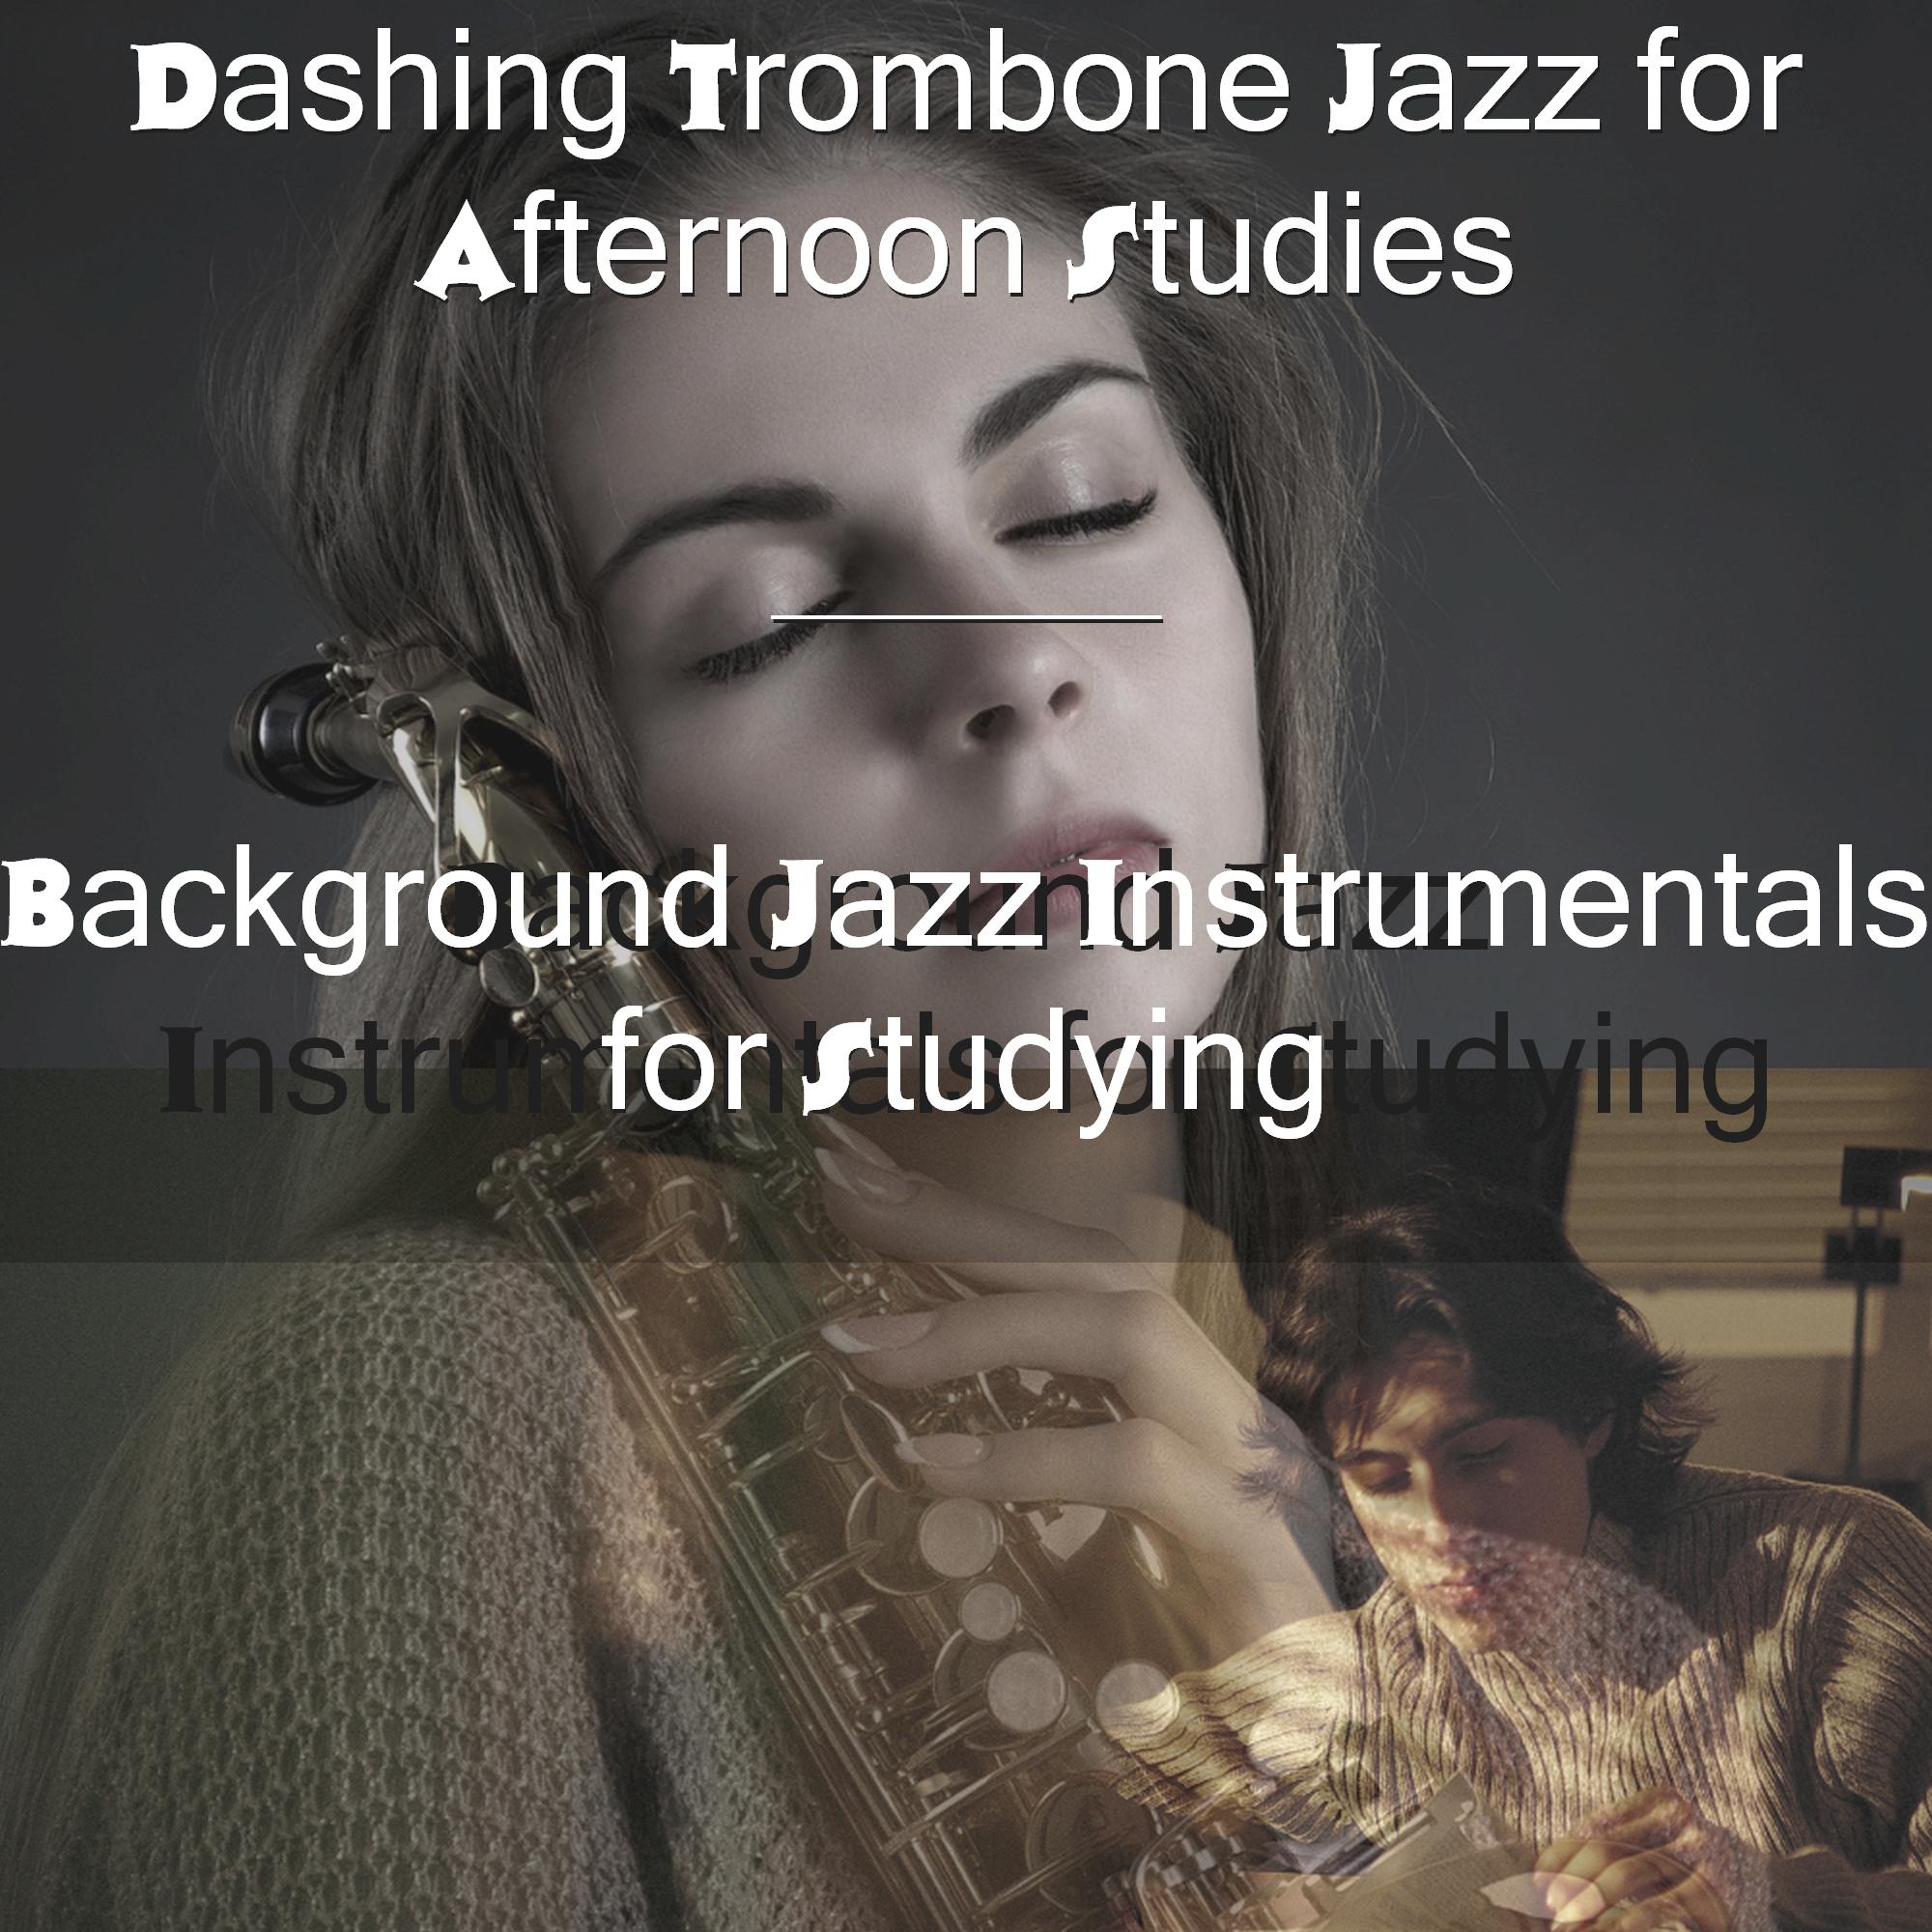 Surprising Trombone Jazz for Studying in the Afternoon